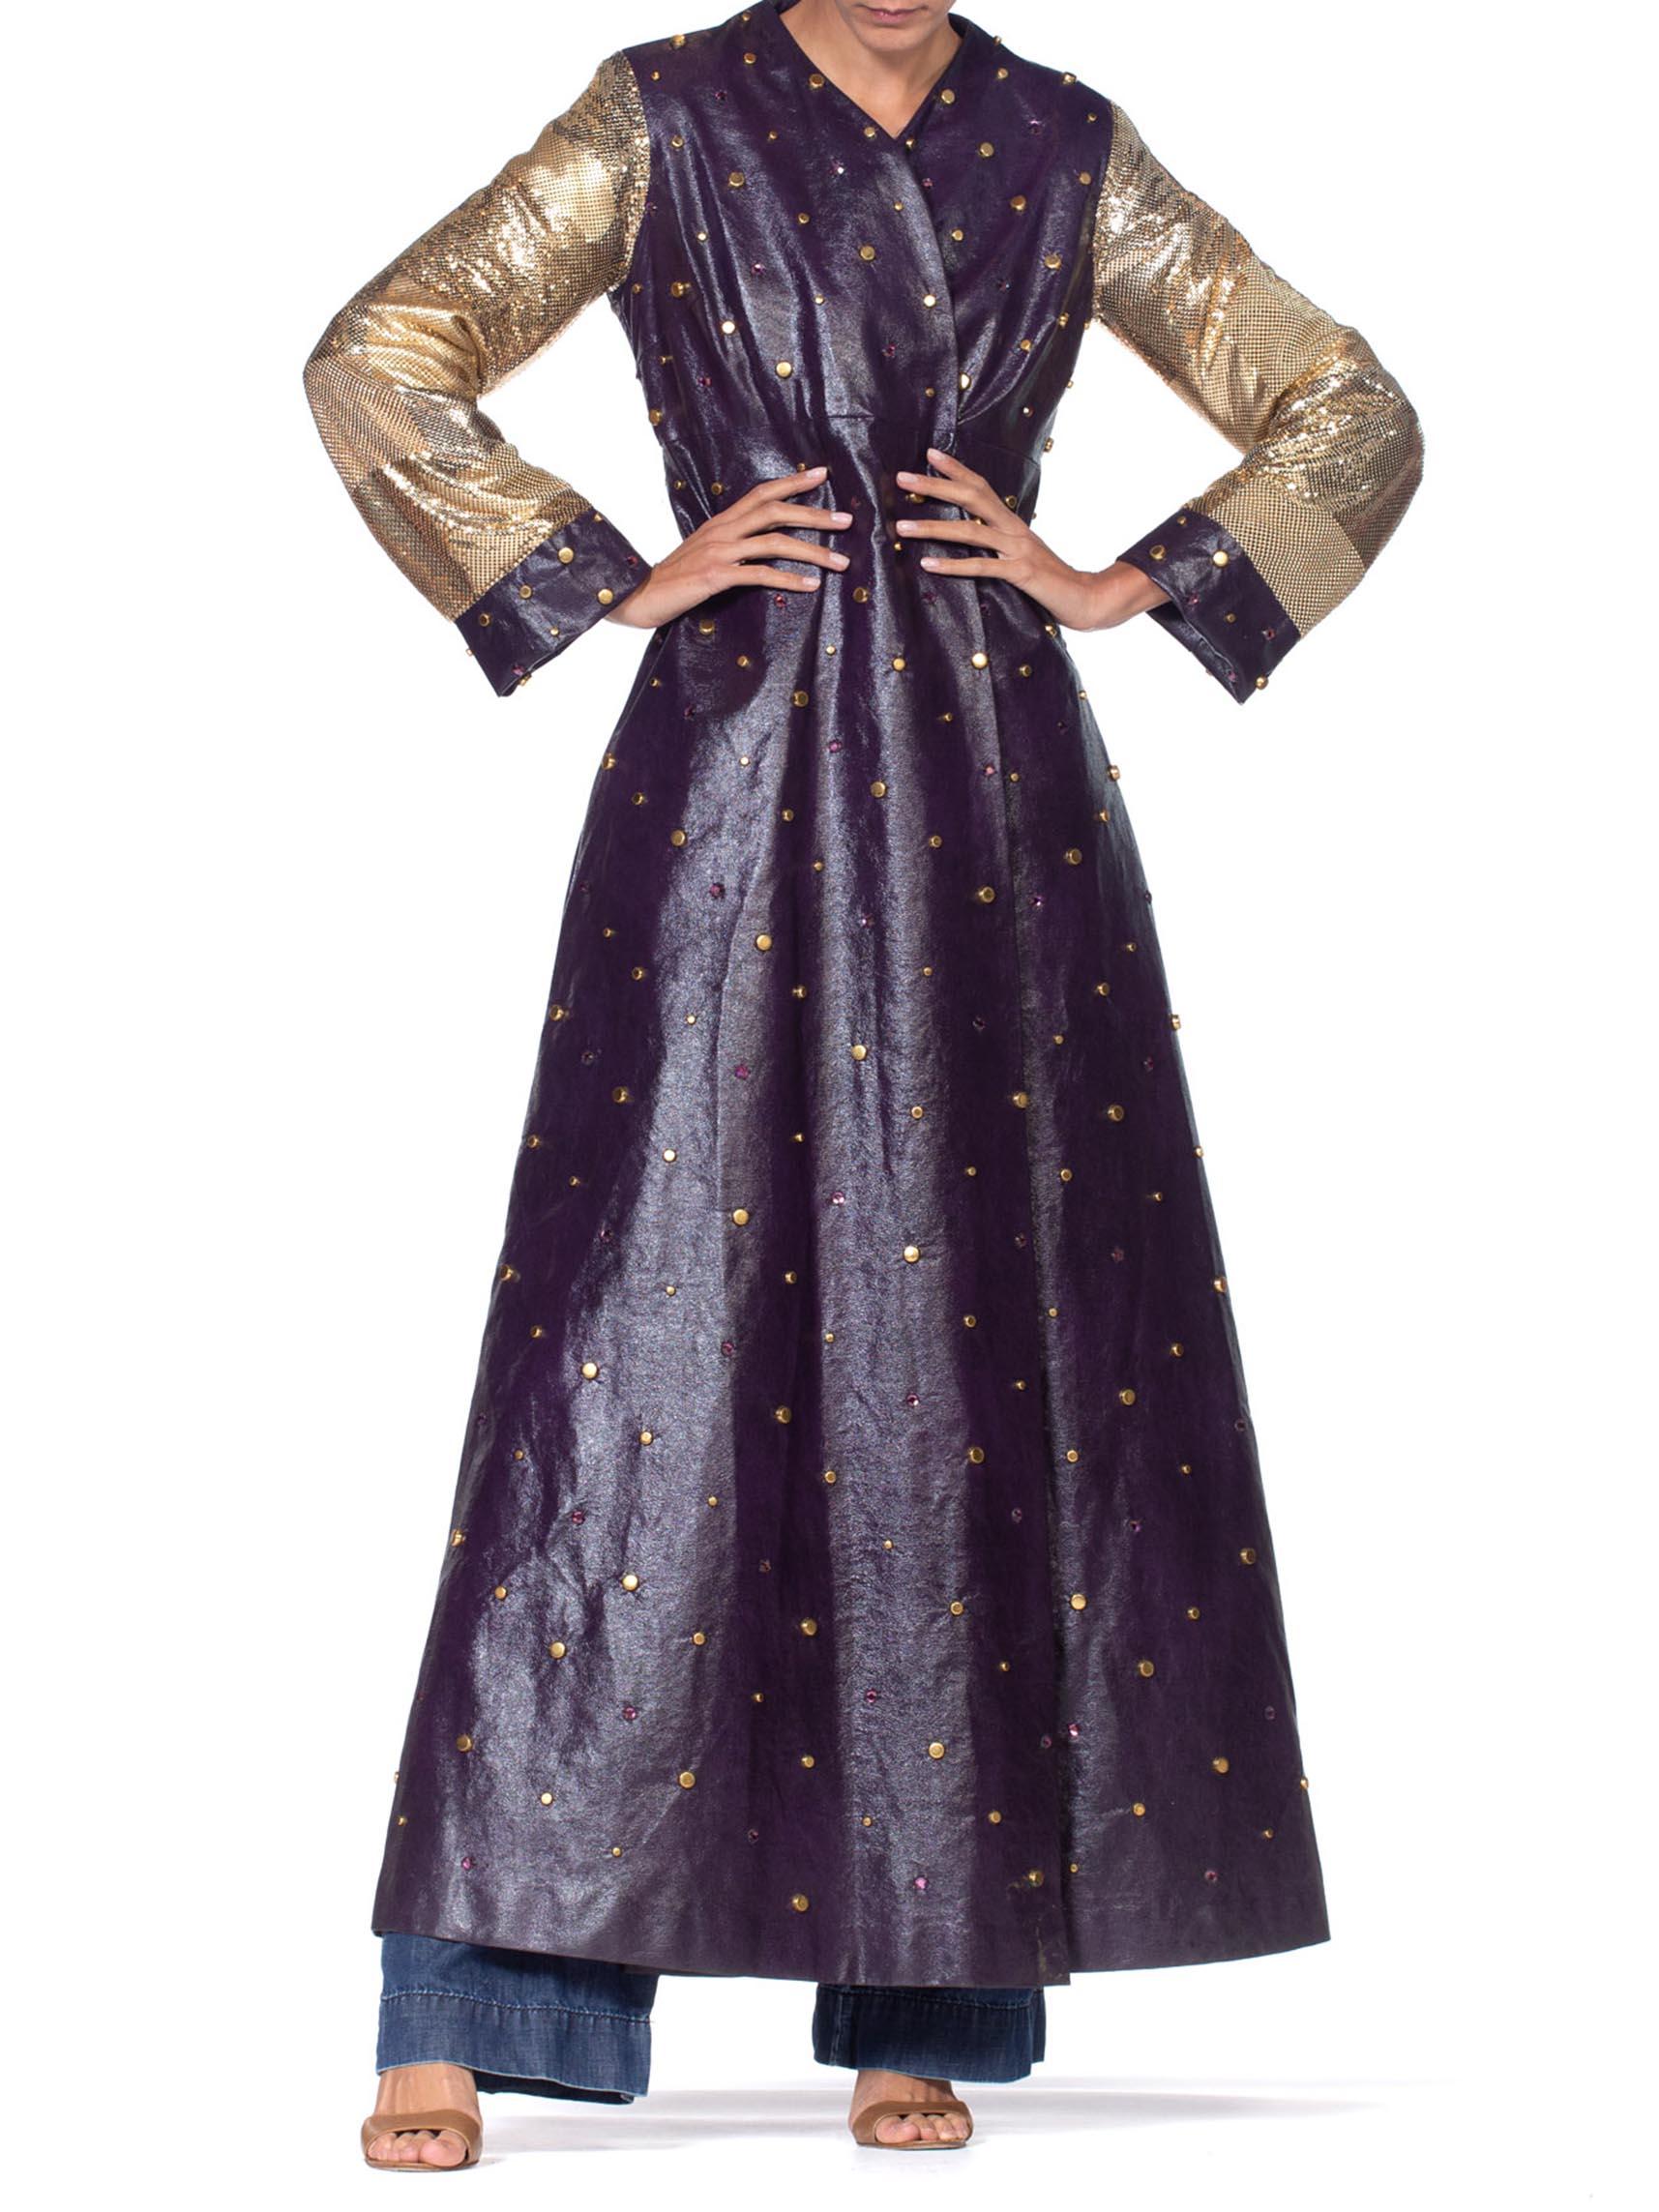 MORPHEW COLLECTION Eggplant Purple Crystal Studded Pleather Maxi Coat With Gold For Sale 3